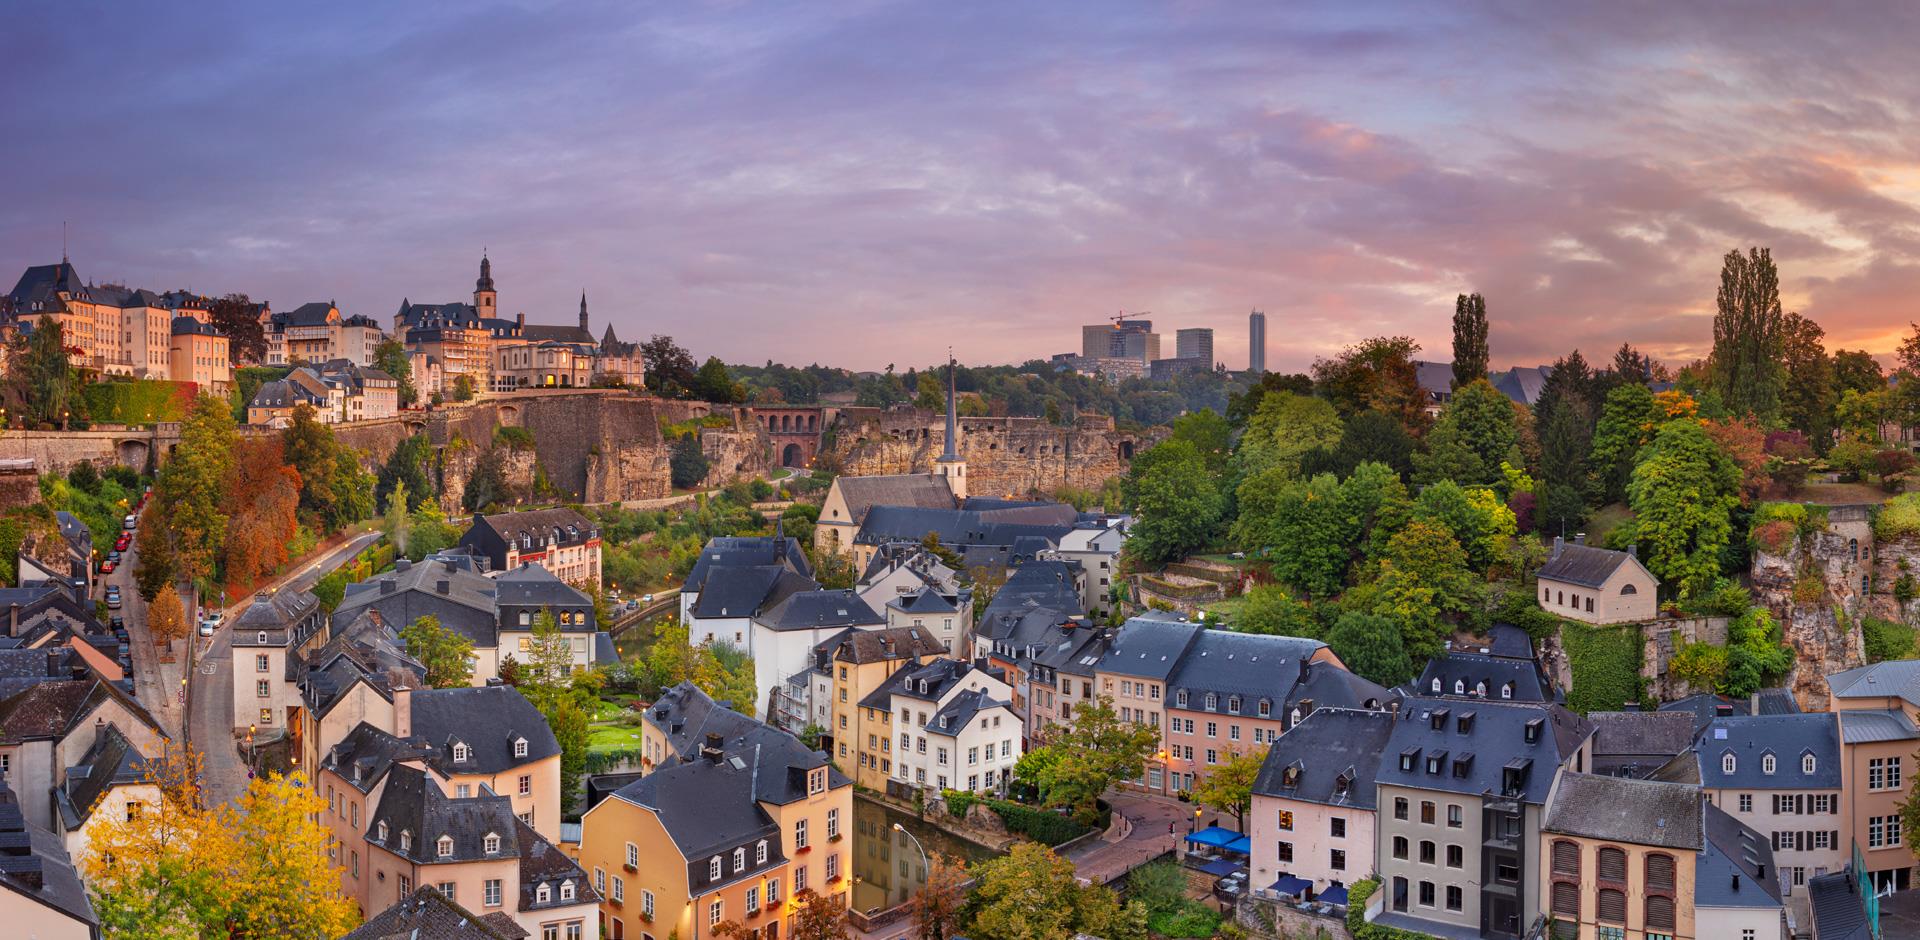 Panoramic cityscape image of old town Luxembourg City, Luxembourg.